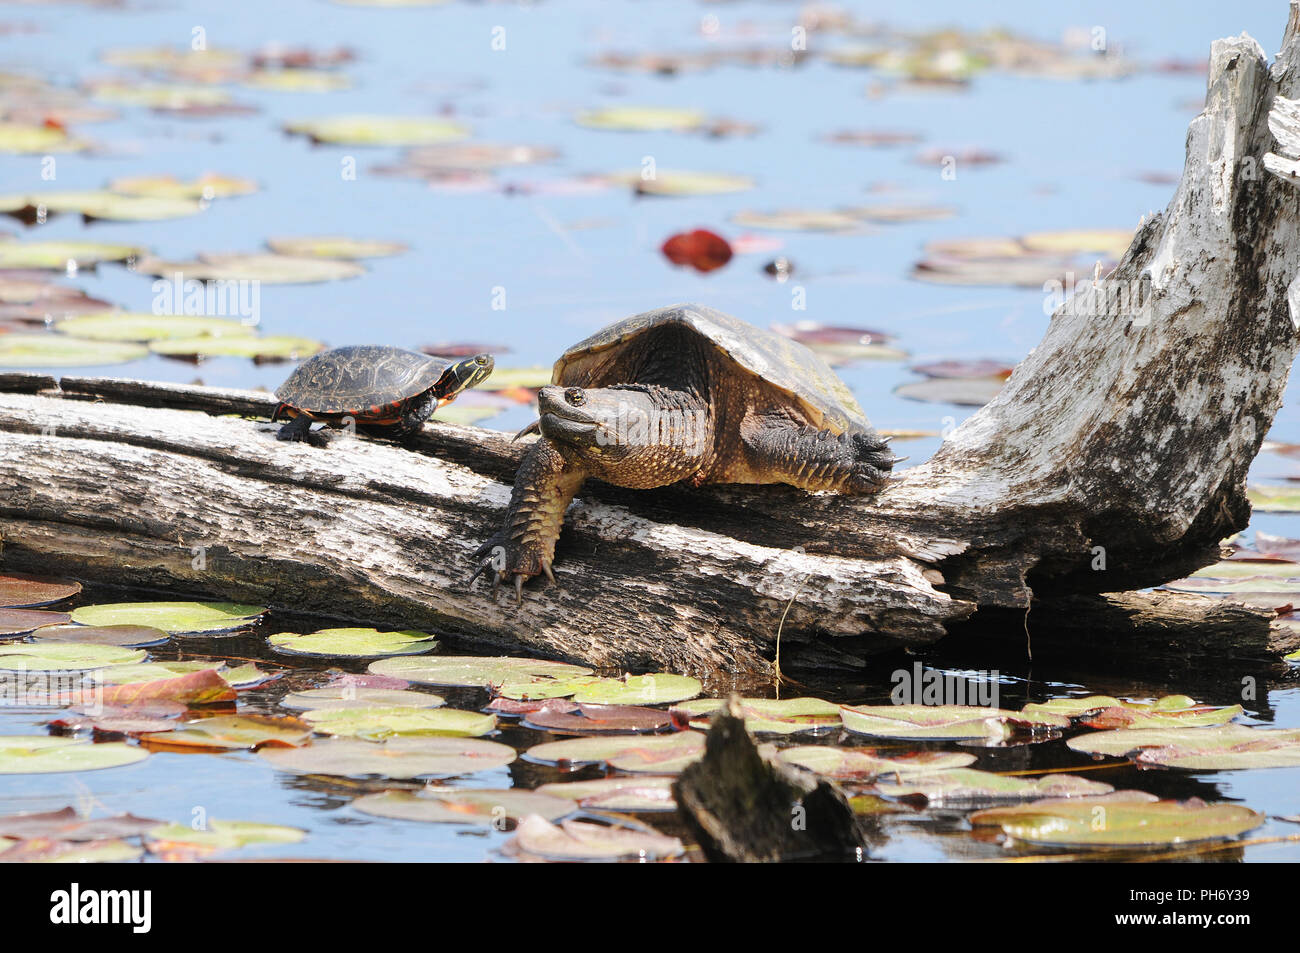 Painted turtle with a snapping turtle on a water log with lily pads foreground and background sharing their environment and surrounding. Peaceful. Stock Photo